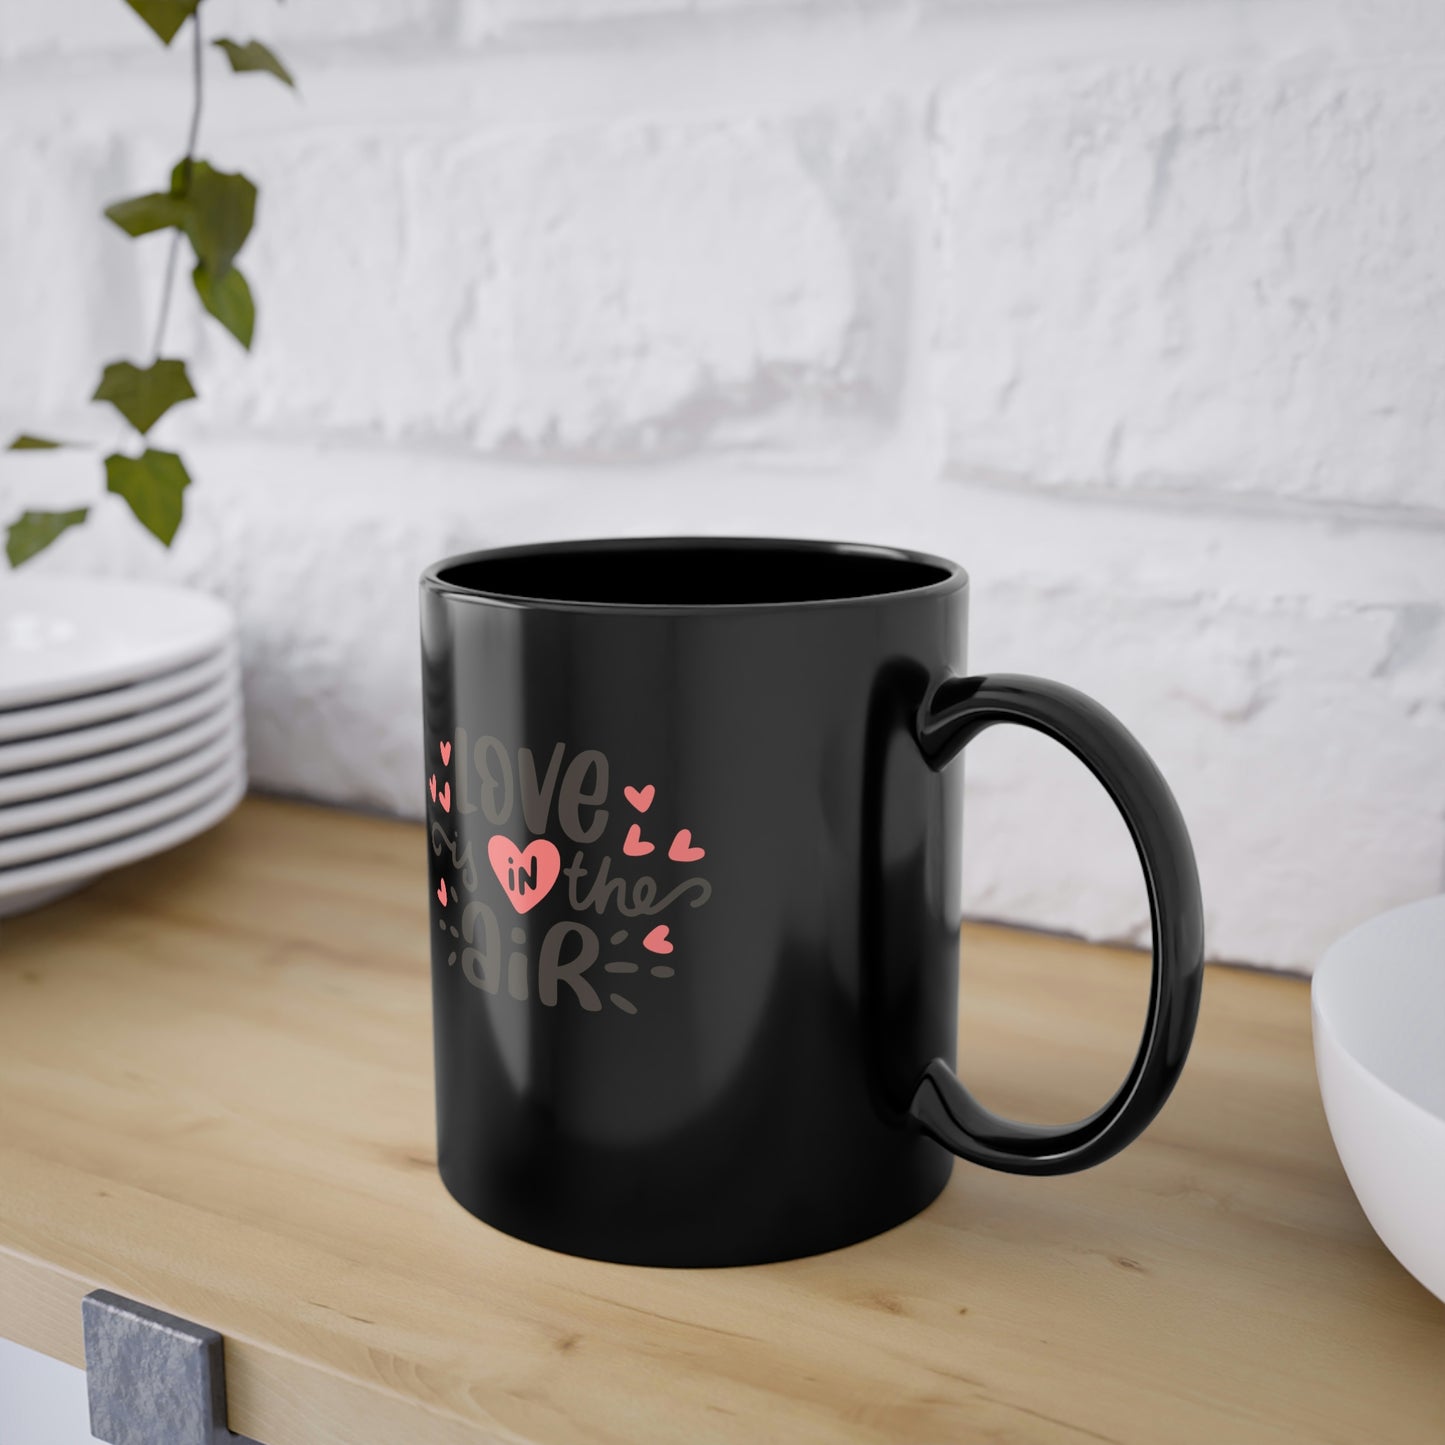 Inspire Empire || Black Cup || Love is in the air